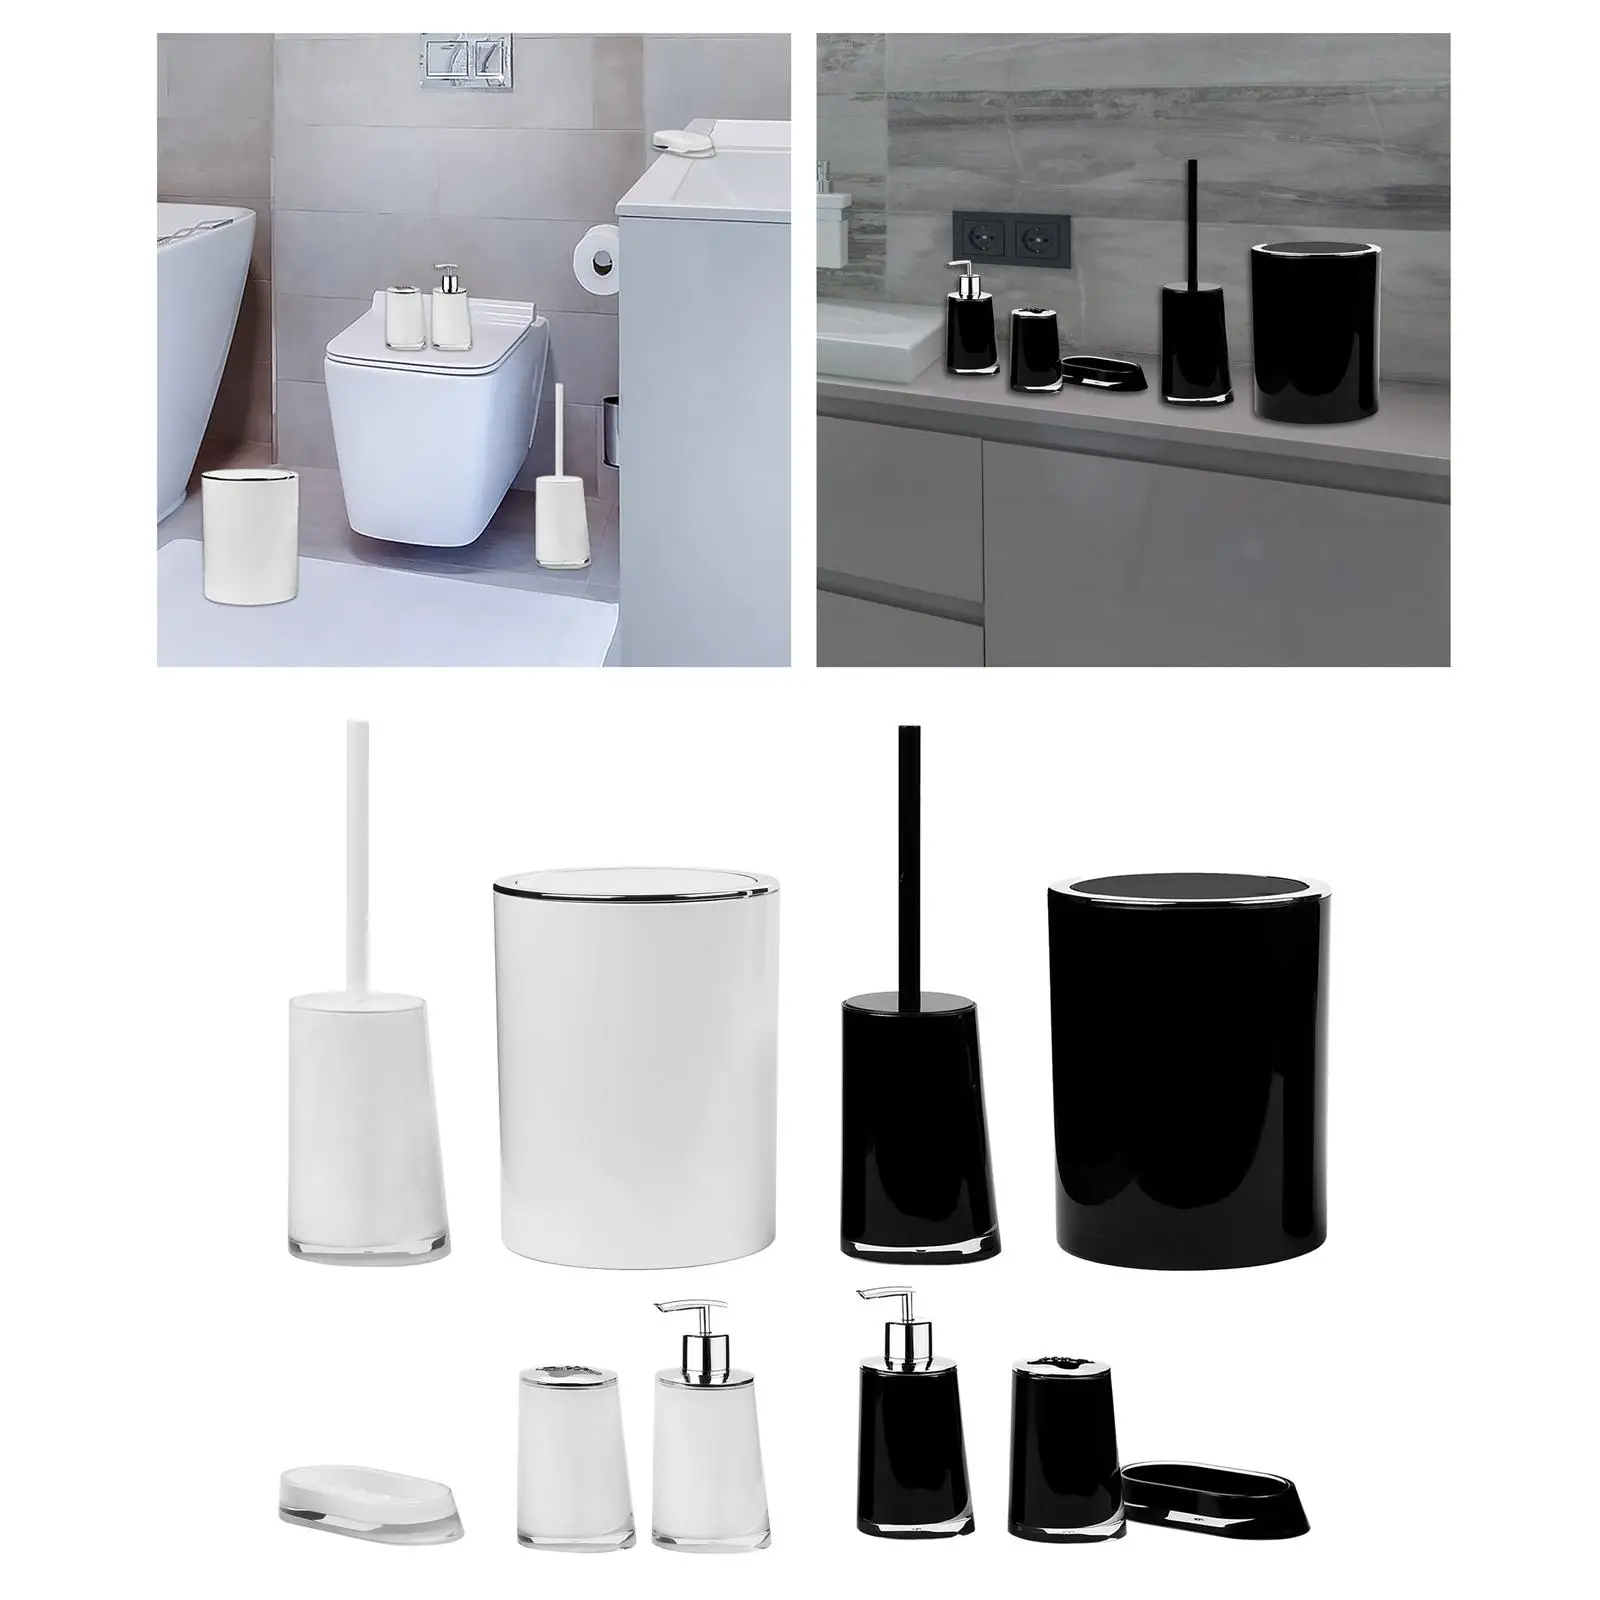 Modern Bathroom Accessories Set Waste Bin Soap Dispenser Soap Dish Toilet Brush with Holder Stylish Bathset 5x for Hotels Home images - 6